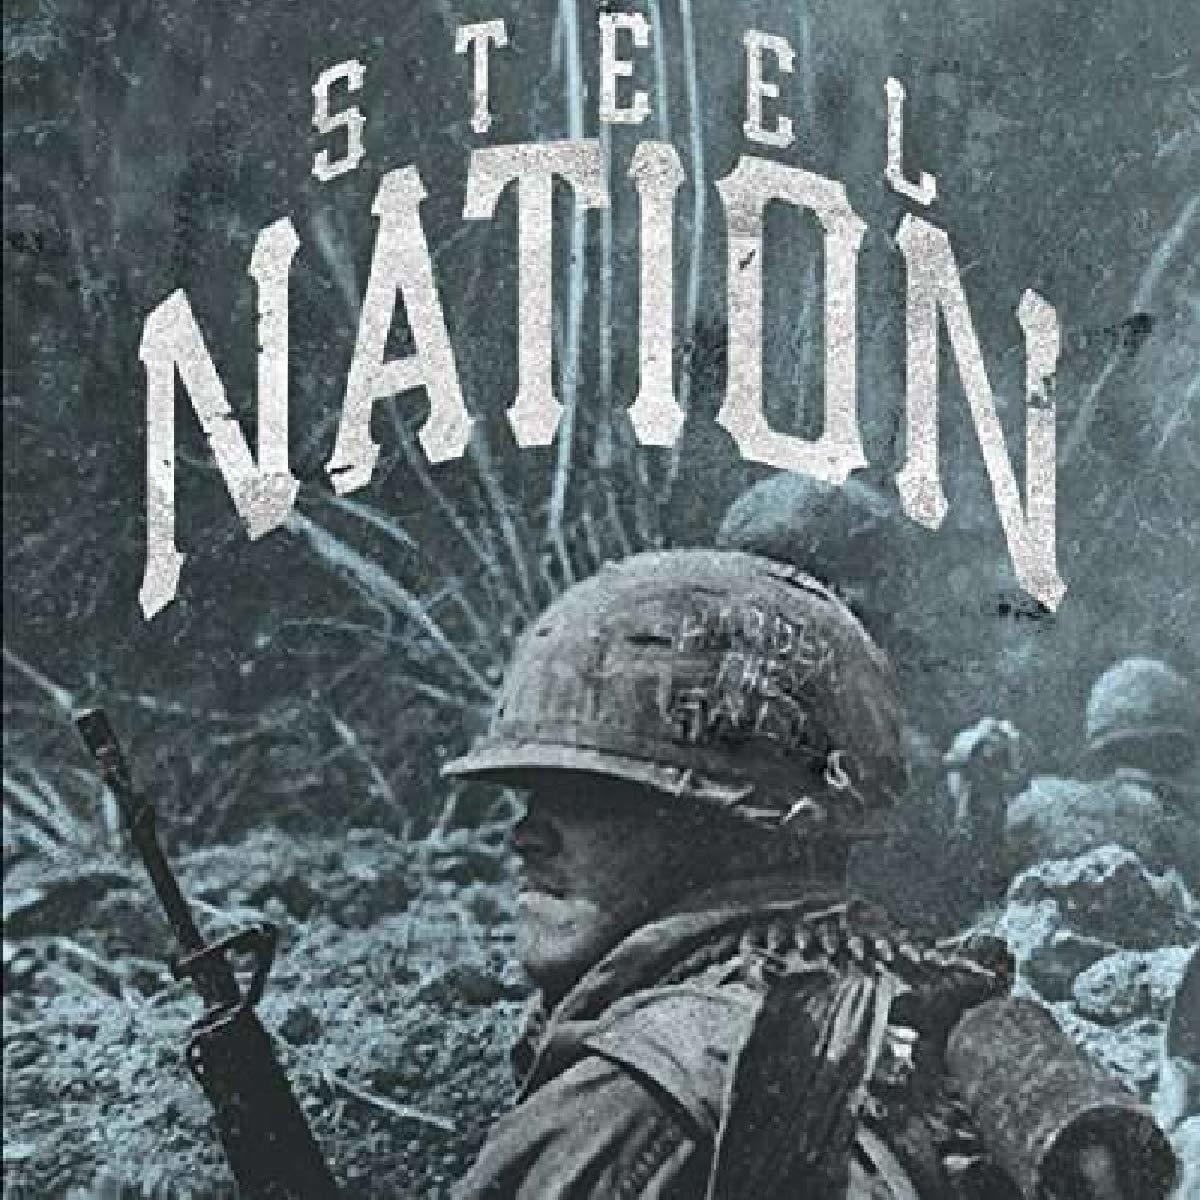 Steel Nation - (Vinyl) Harder They Fall - The